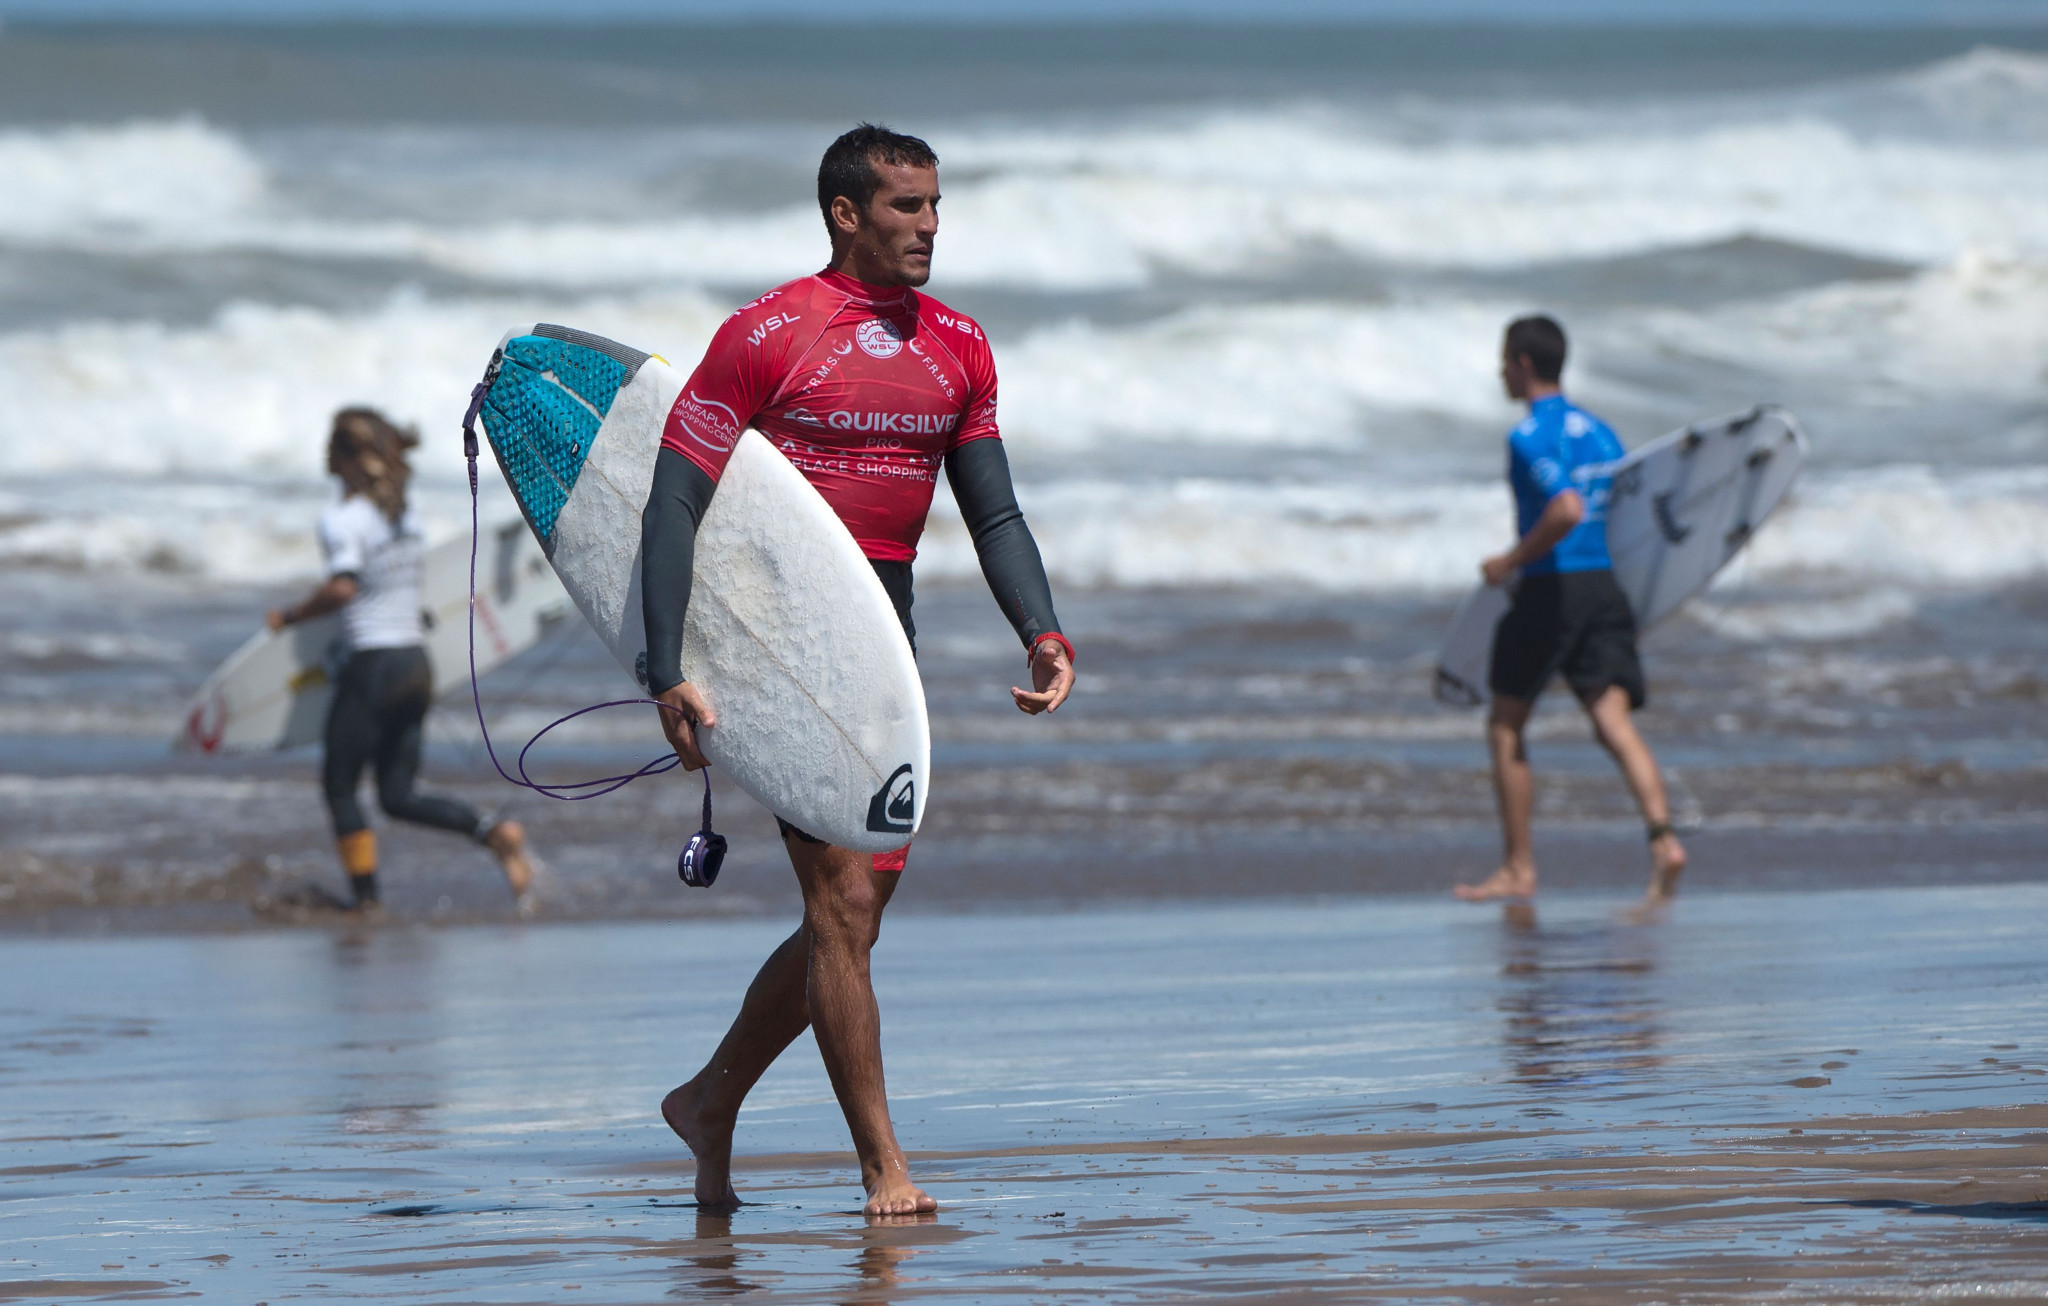 Surfer Boukhiam and boxer Bel Habib named Morocco's flagbearers for Tokyo 2020 Opening Ceremony